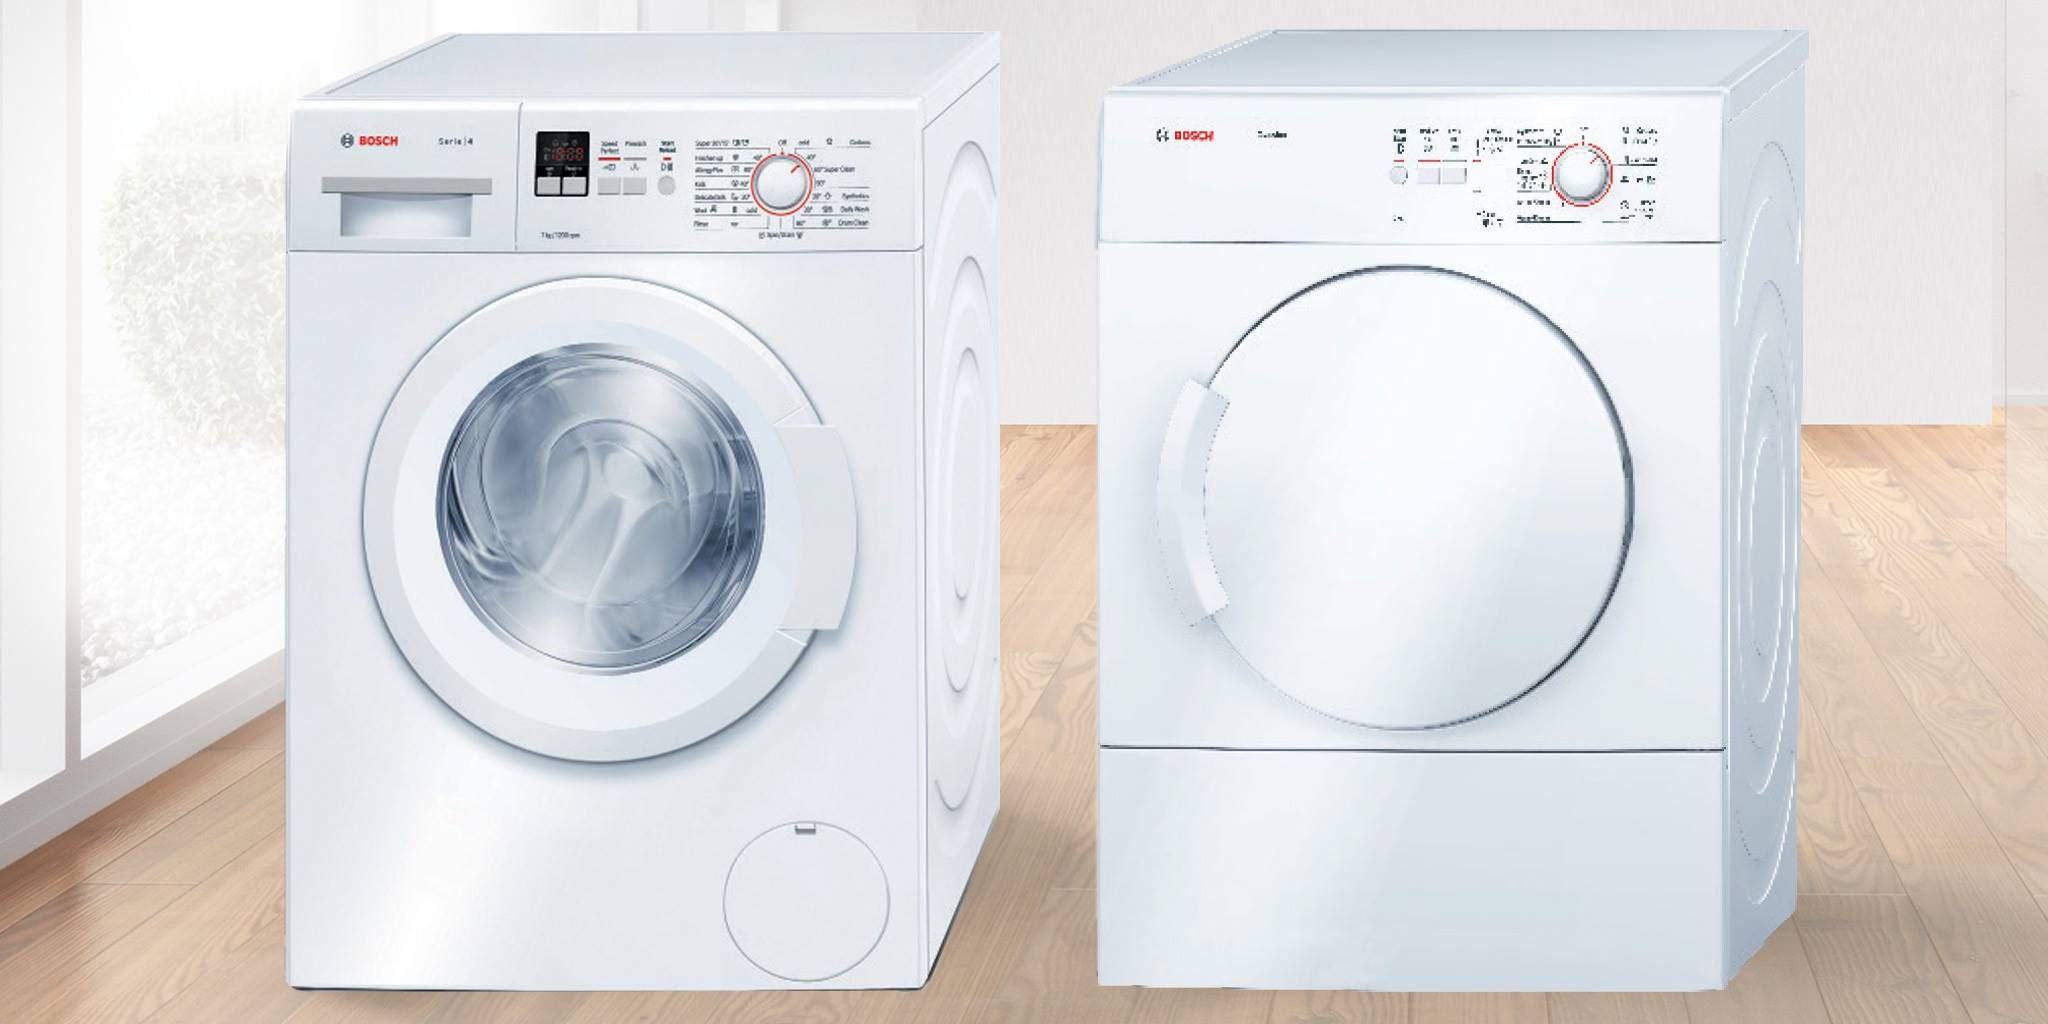 Bosch Singapore 50% Off Bosch 6kg Vented Dryer at COURTS Promotion 5-31 May 2017